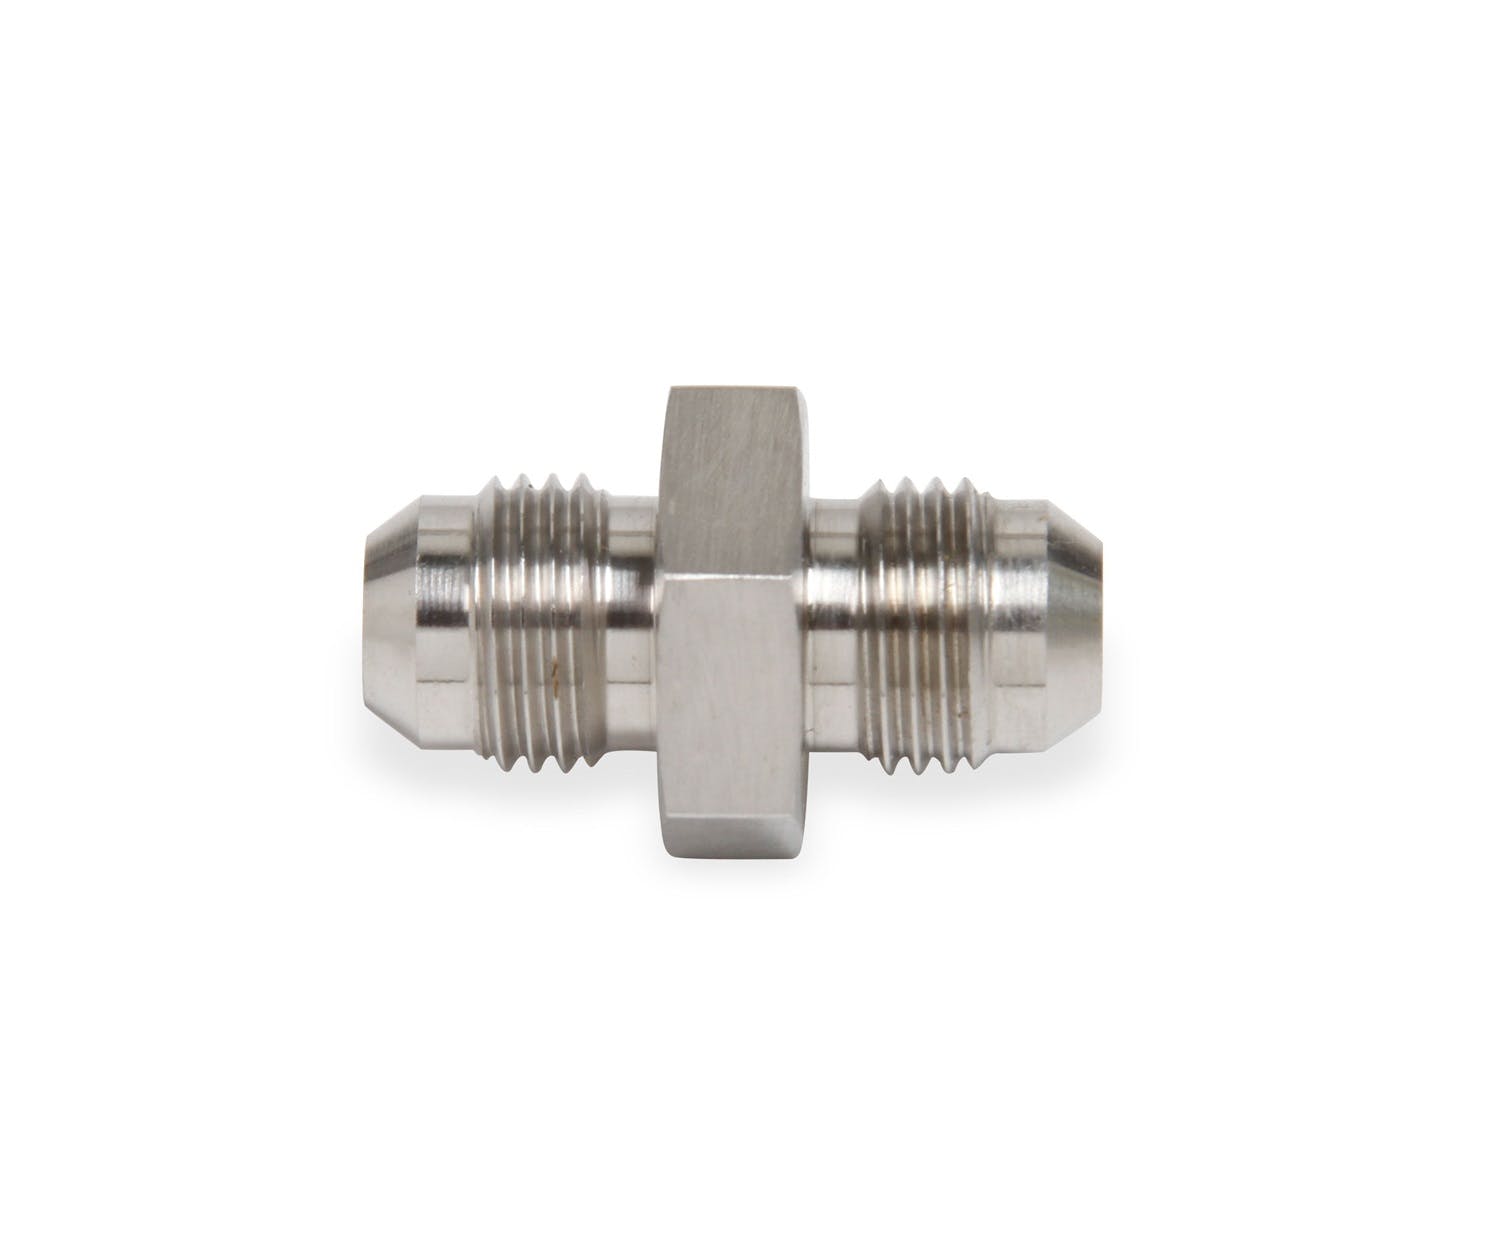 Earl's Performance Plumbing SS981510ERL -10 UNION STAINLESS STEEL